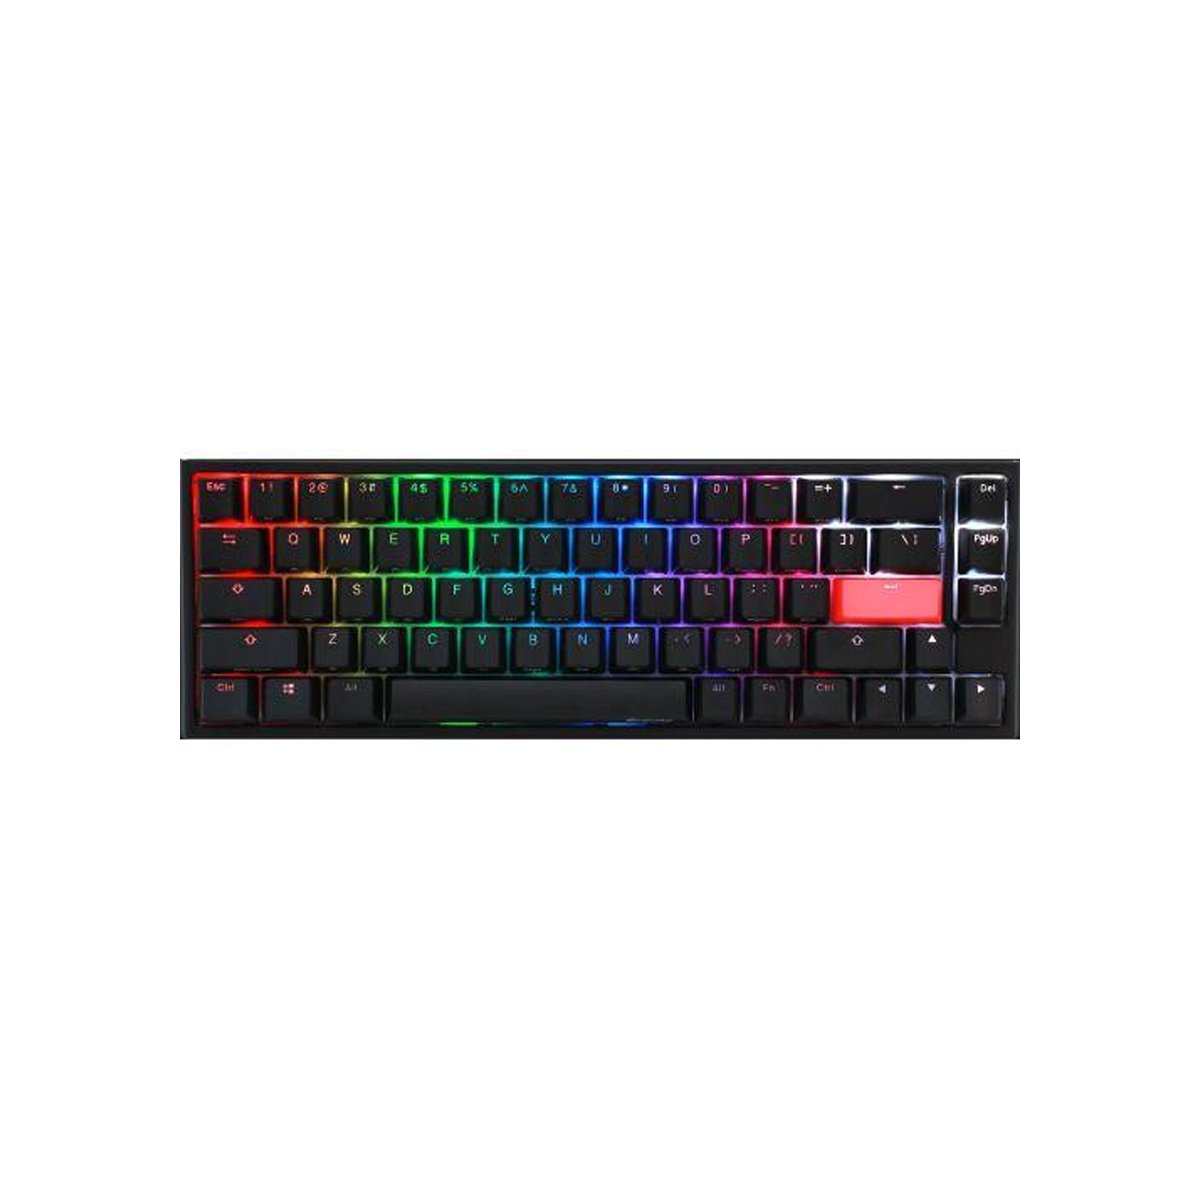 Ducky One SF RGB Mechanical Keyboard Cherry MX Blue at Prices in Qatar | Starlink-QA – ooredoonation